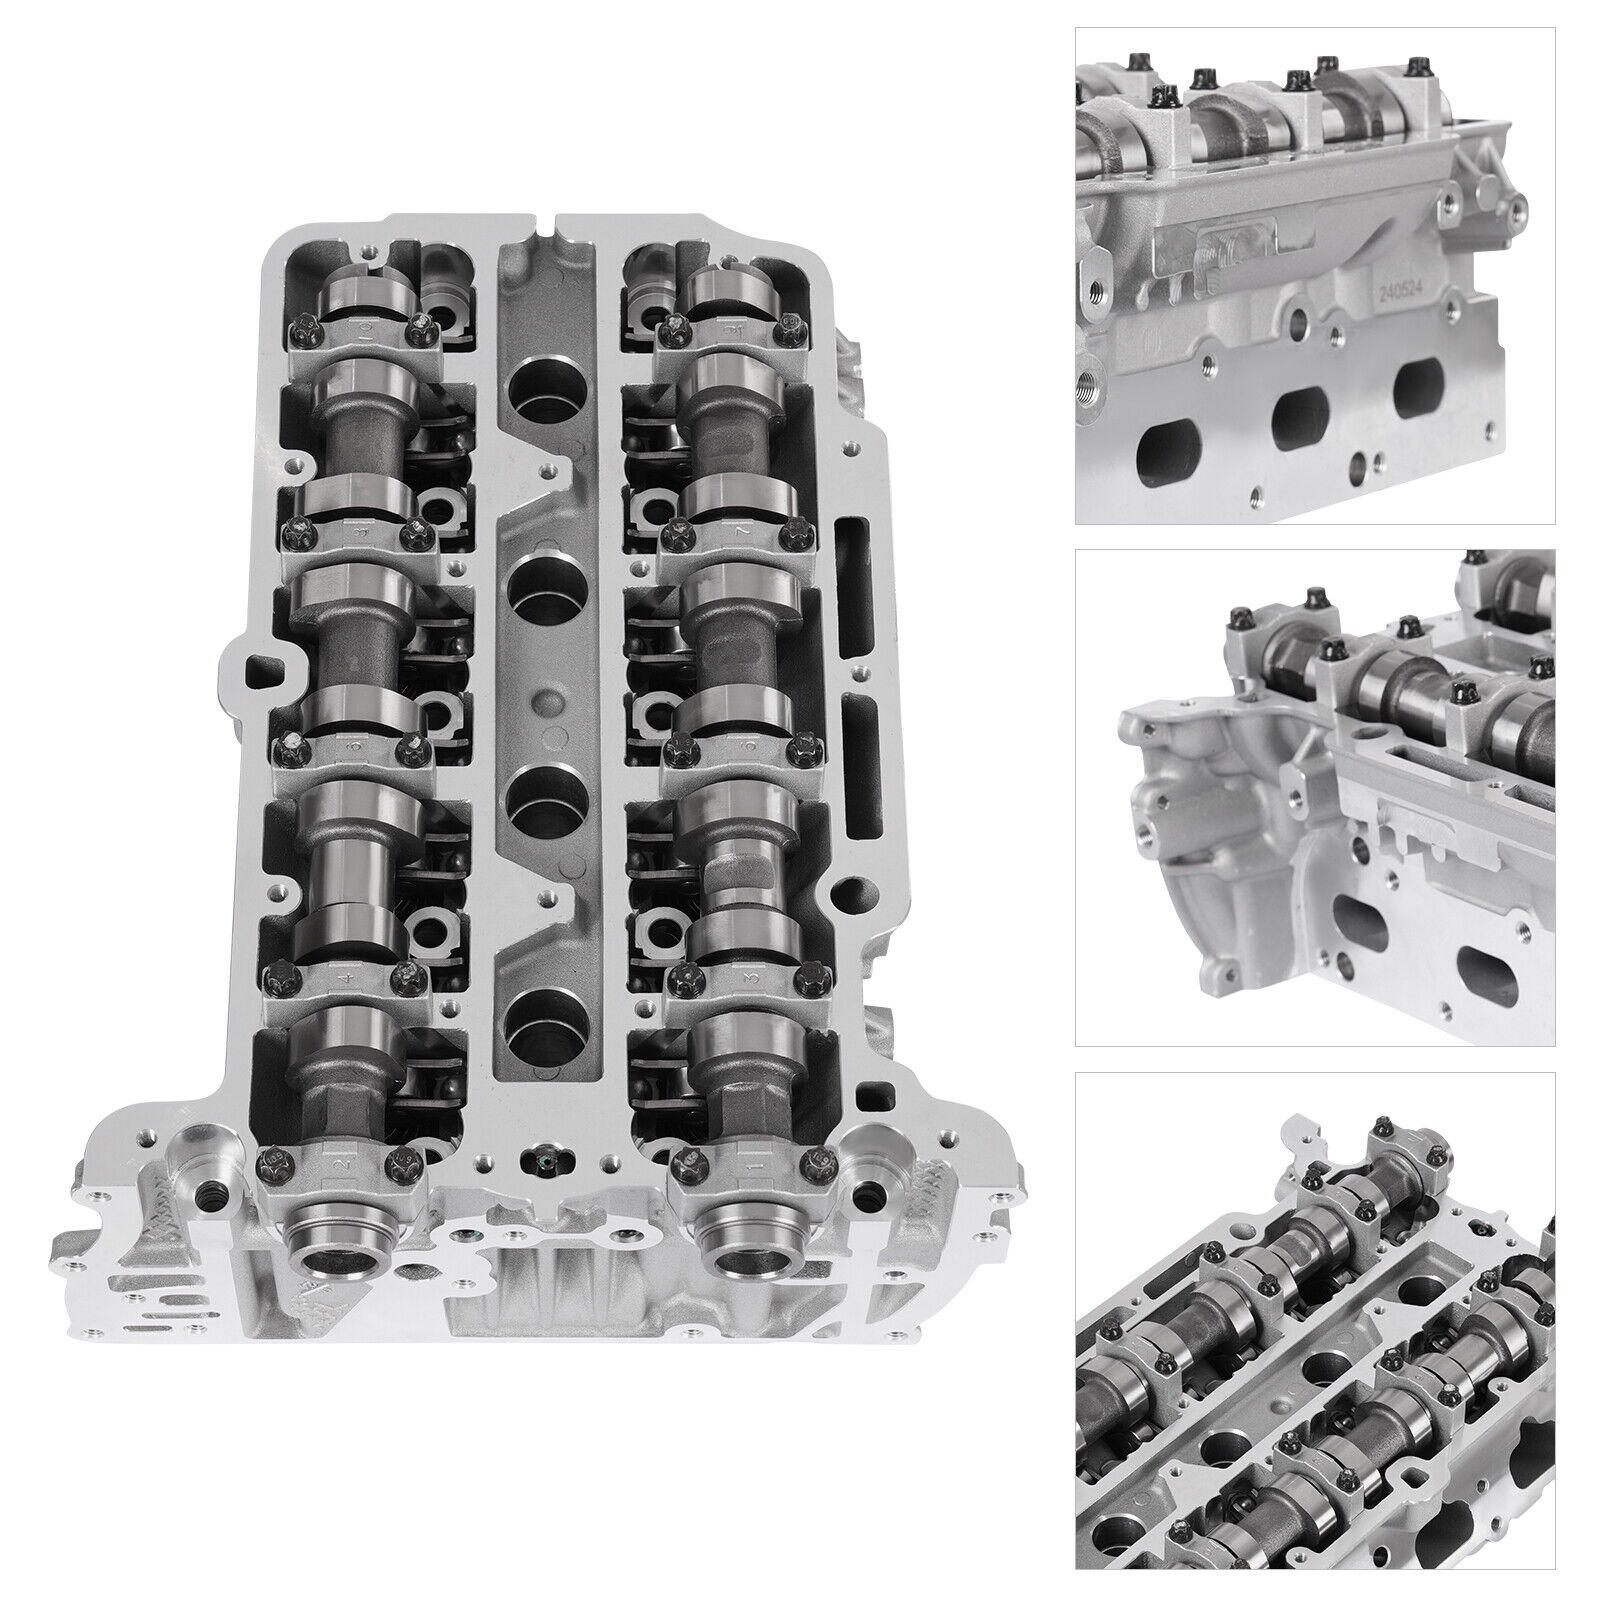 For Chevrolet Cruze Sonic Encore Trax 1.4L Turbo Cylinder Head 55573669 Assembly